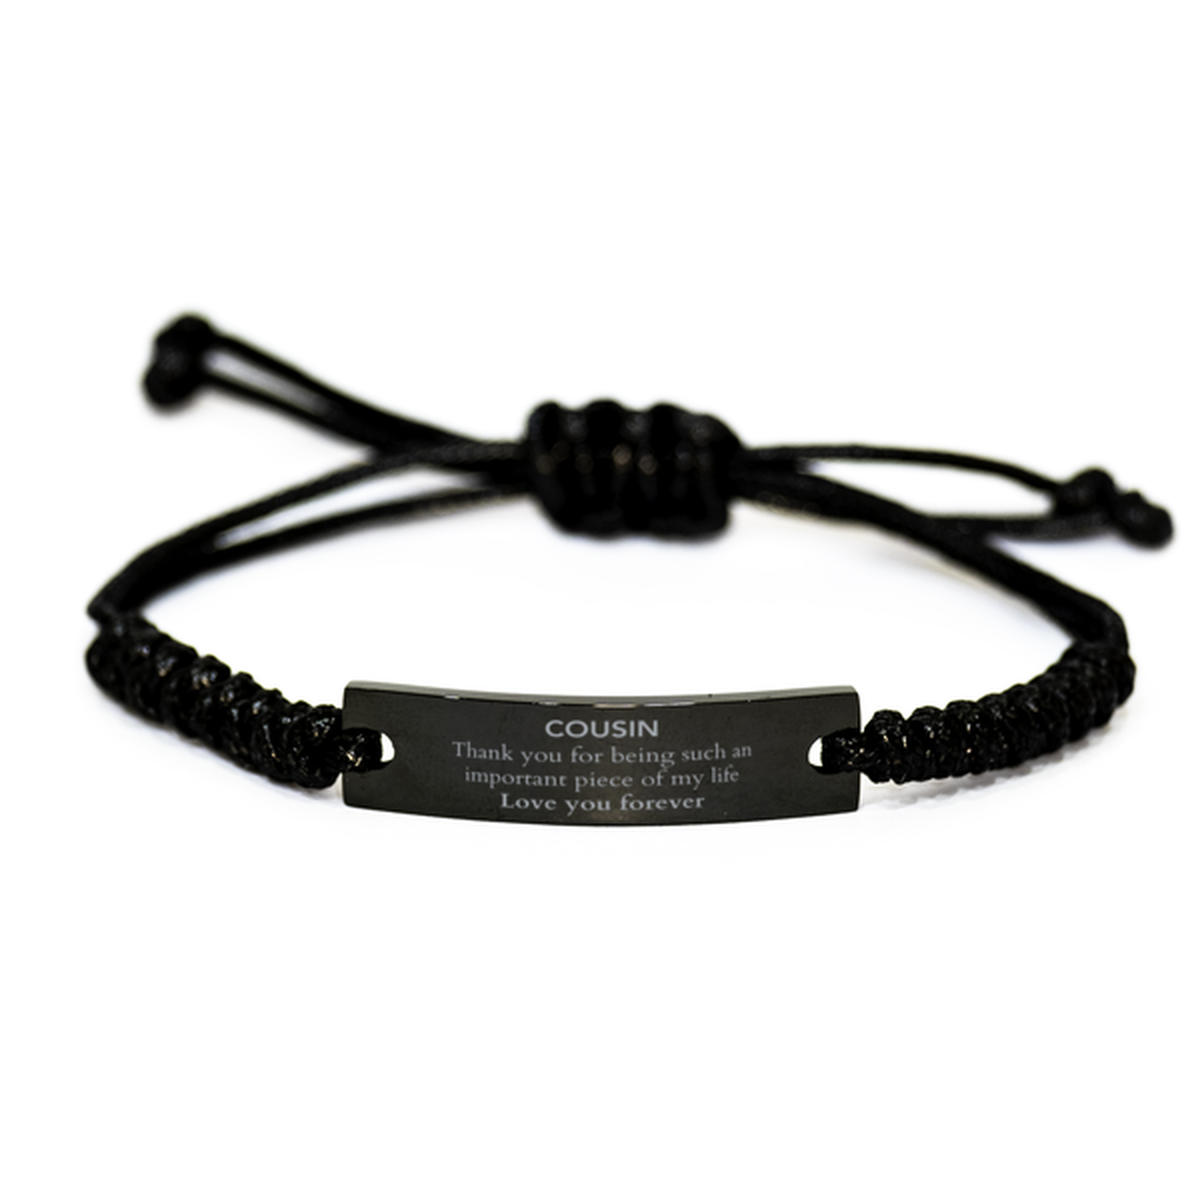 Appropriate Cousin Black Rope Bracelet Epic Birthday Gifts for Cousin Thank you for being such an important piece of my life Cousin Christmas Mothers Fathers Day